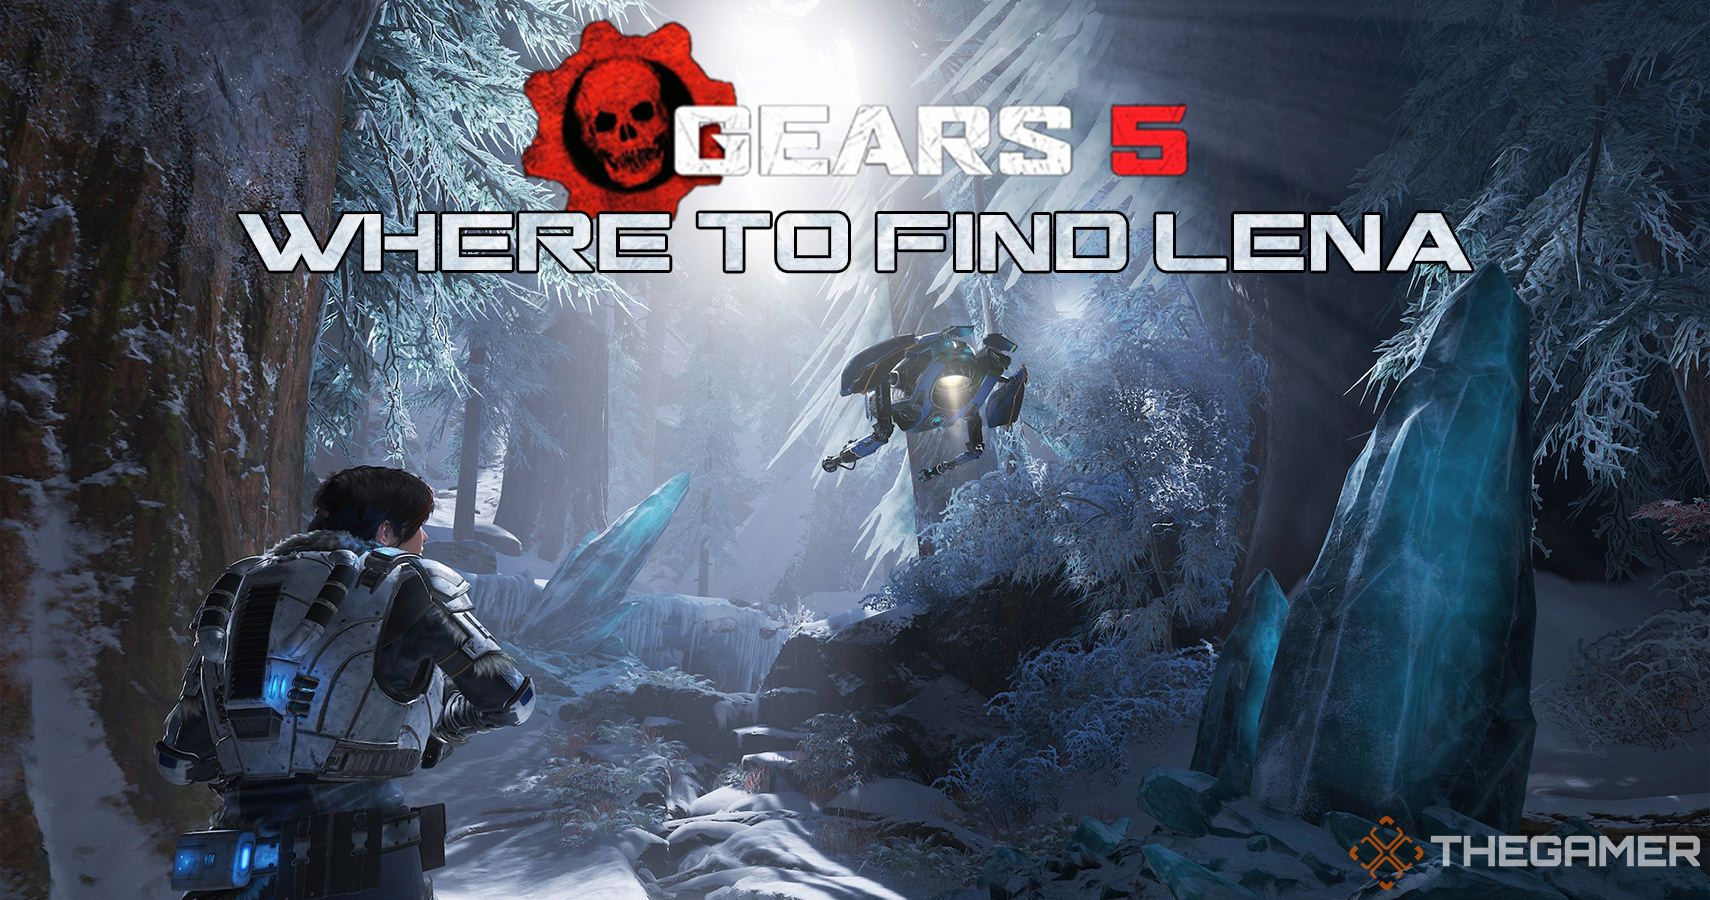 Gears 5 Where To Find Lena